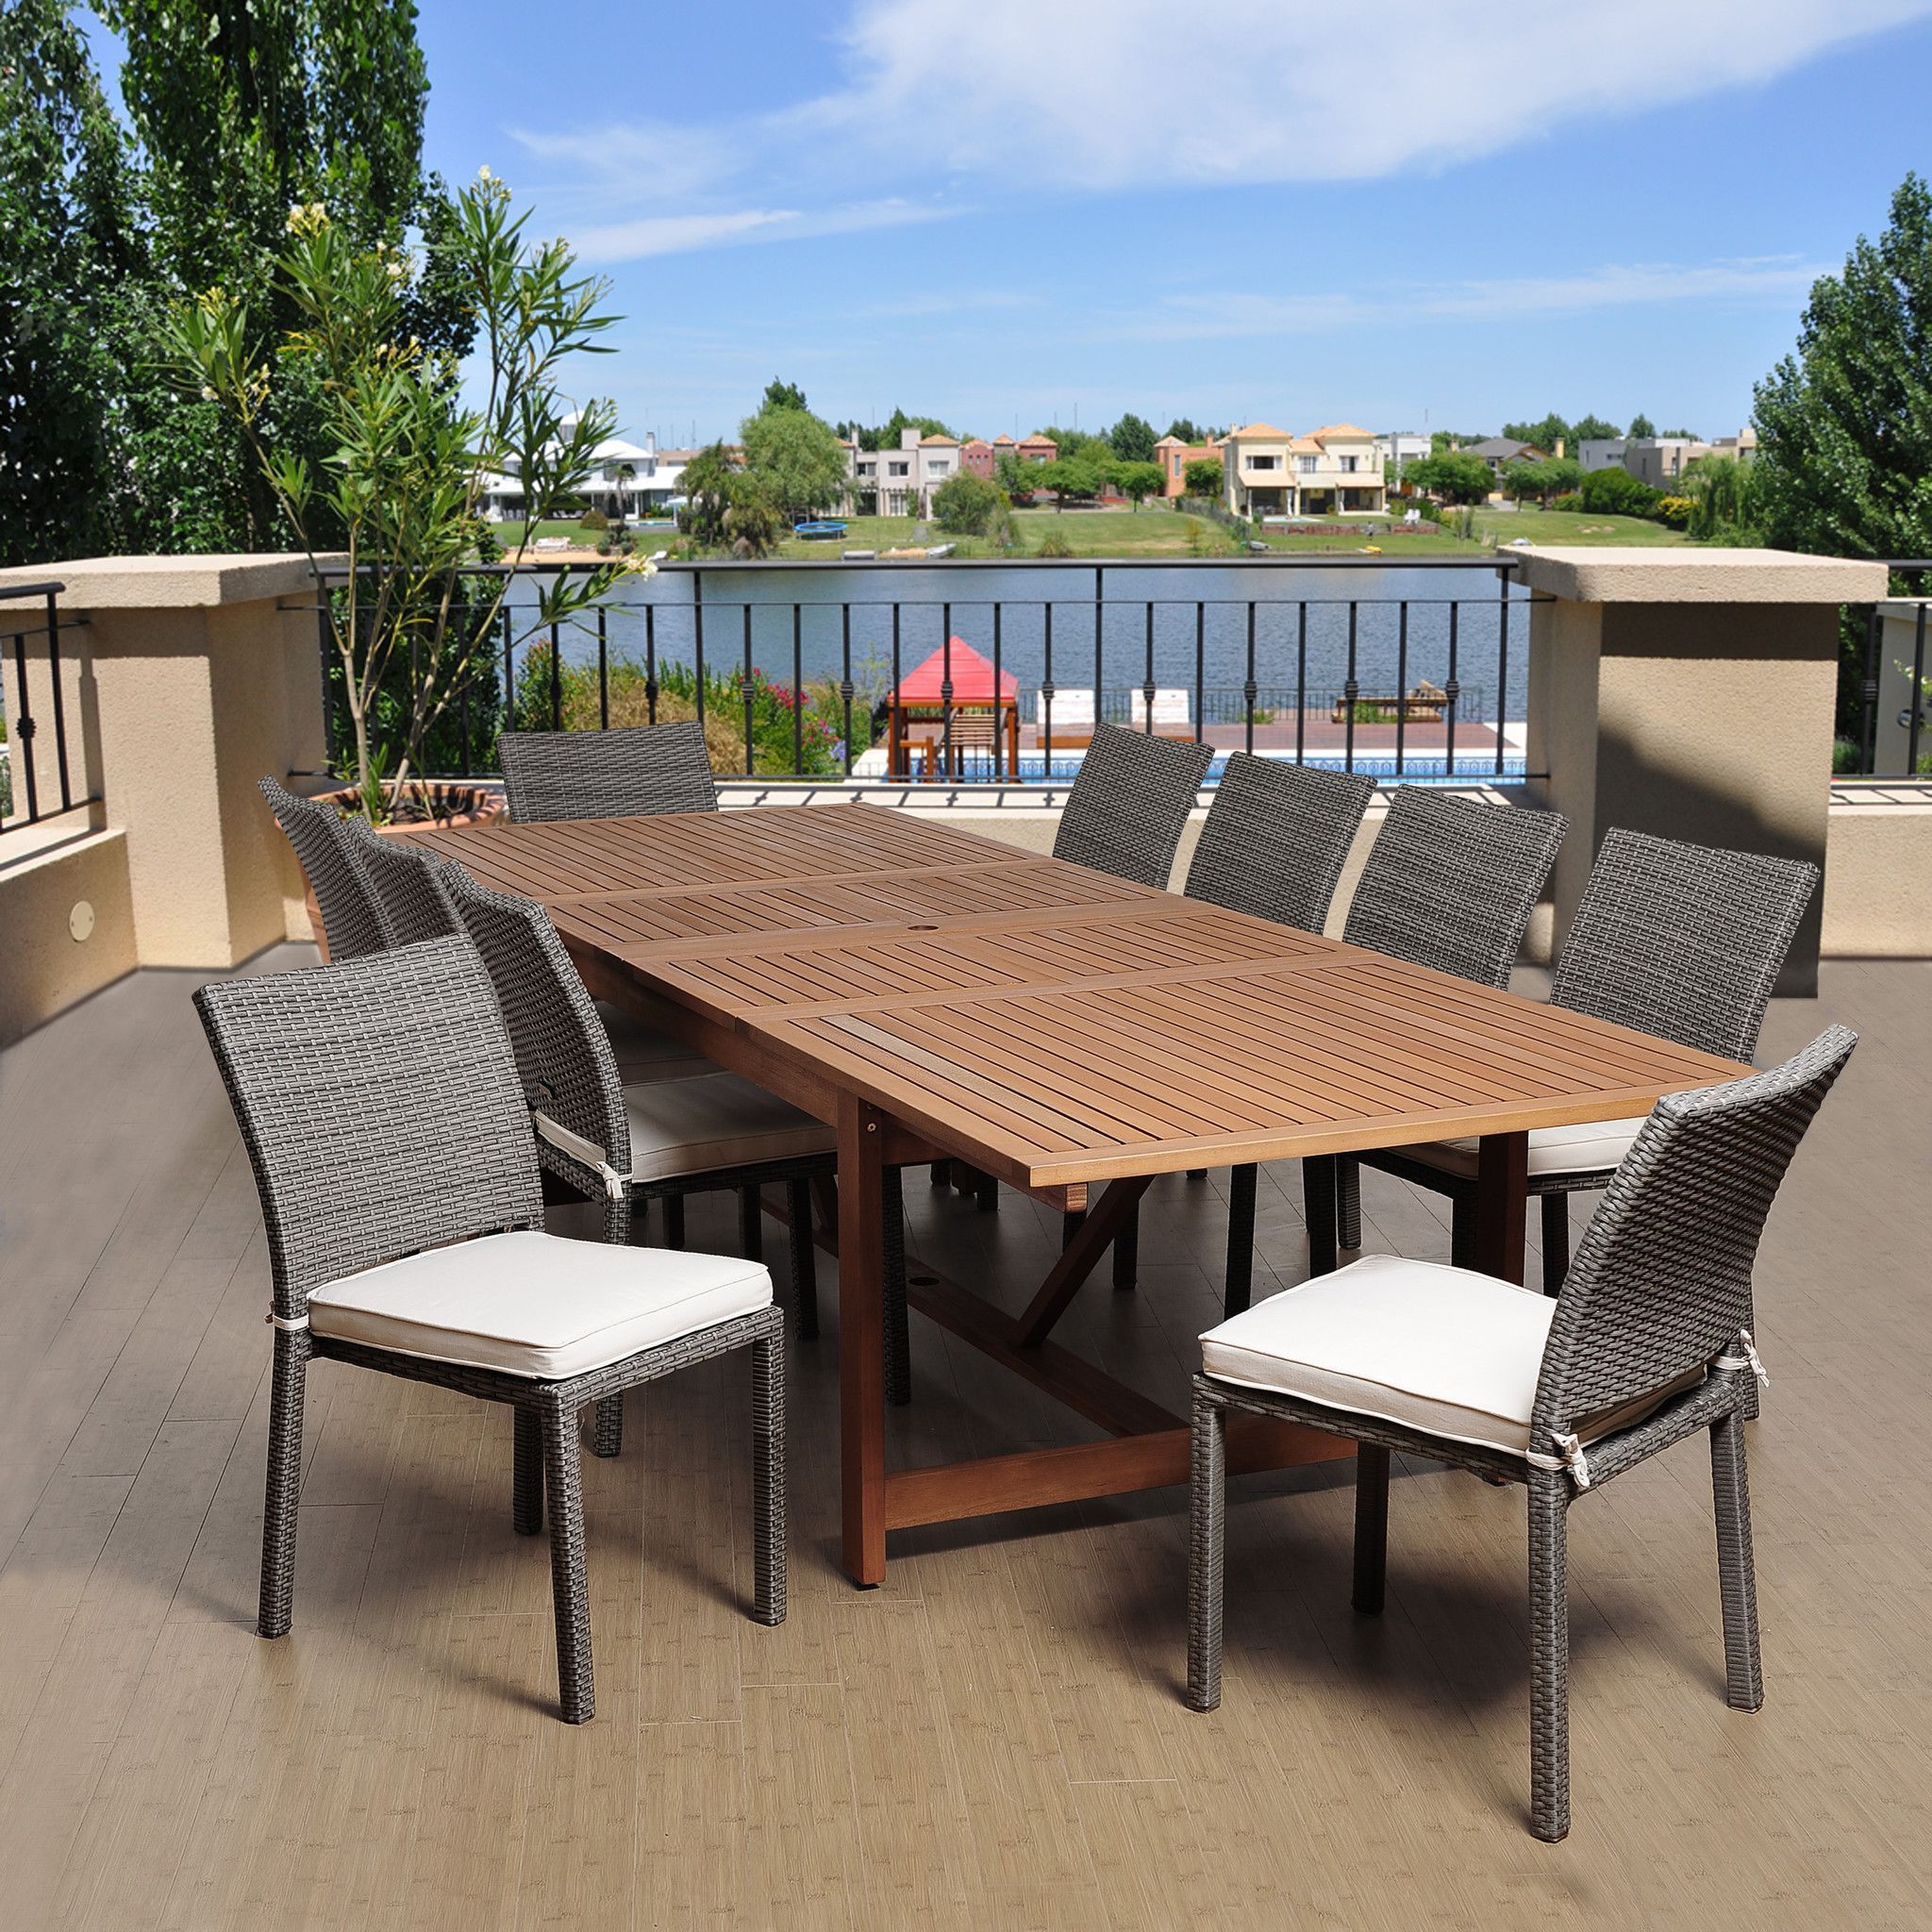 Extendable Patio Dining Set With Regard To Best And Newest Angelo 11 Piece Eucalyptus/wicker Extendable Rectangular Patio Dining (View 2 of 15)